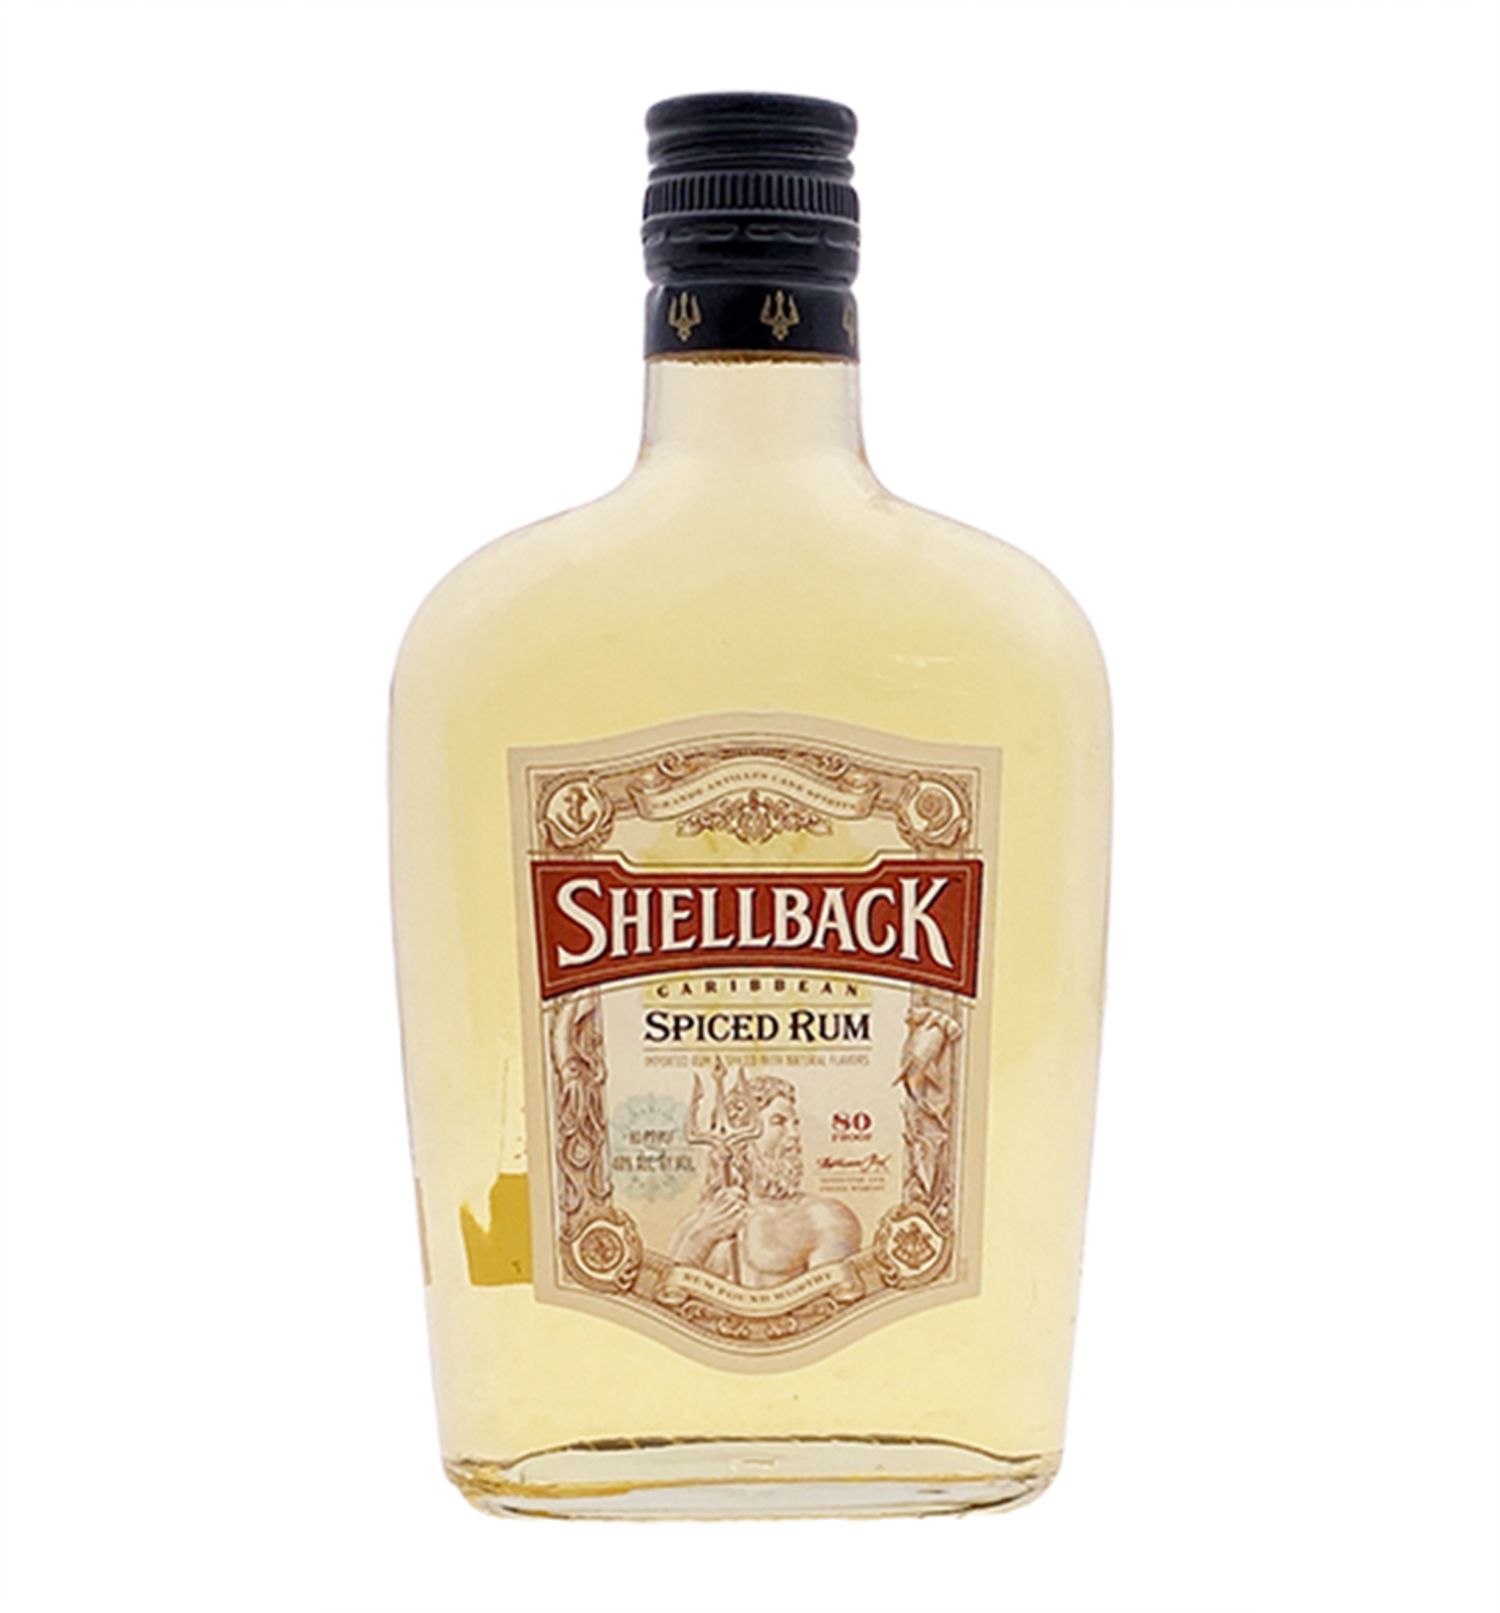 Uncle DELIVERY Shellback, FREE Rum $12 Fossil Wine&Spirits 375ml - Caribbean Spiced